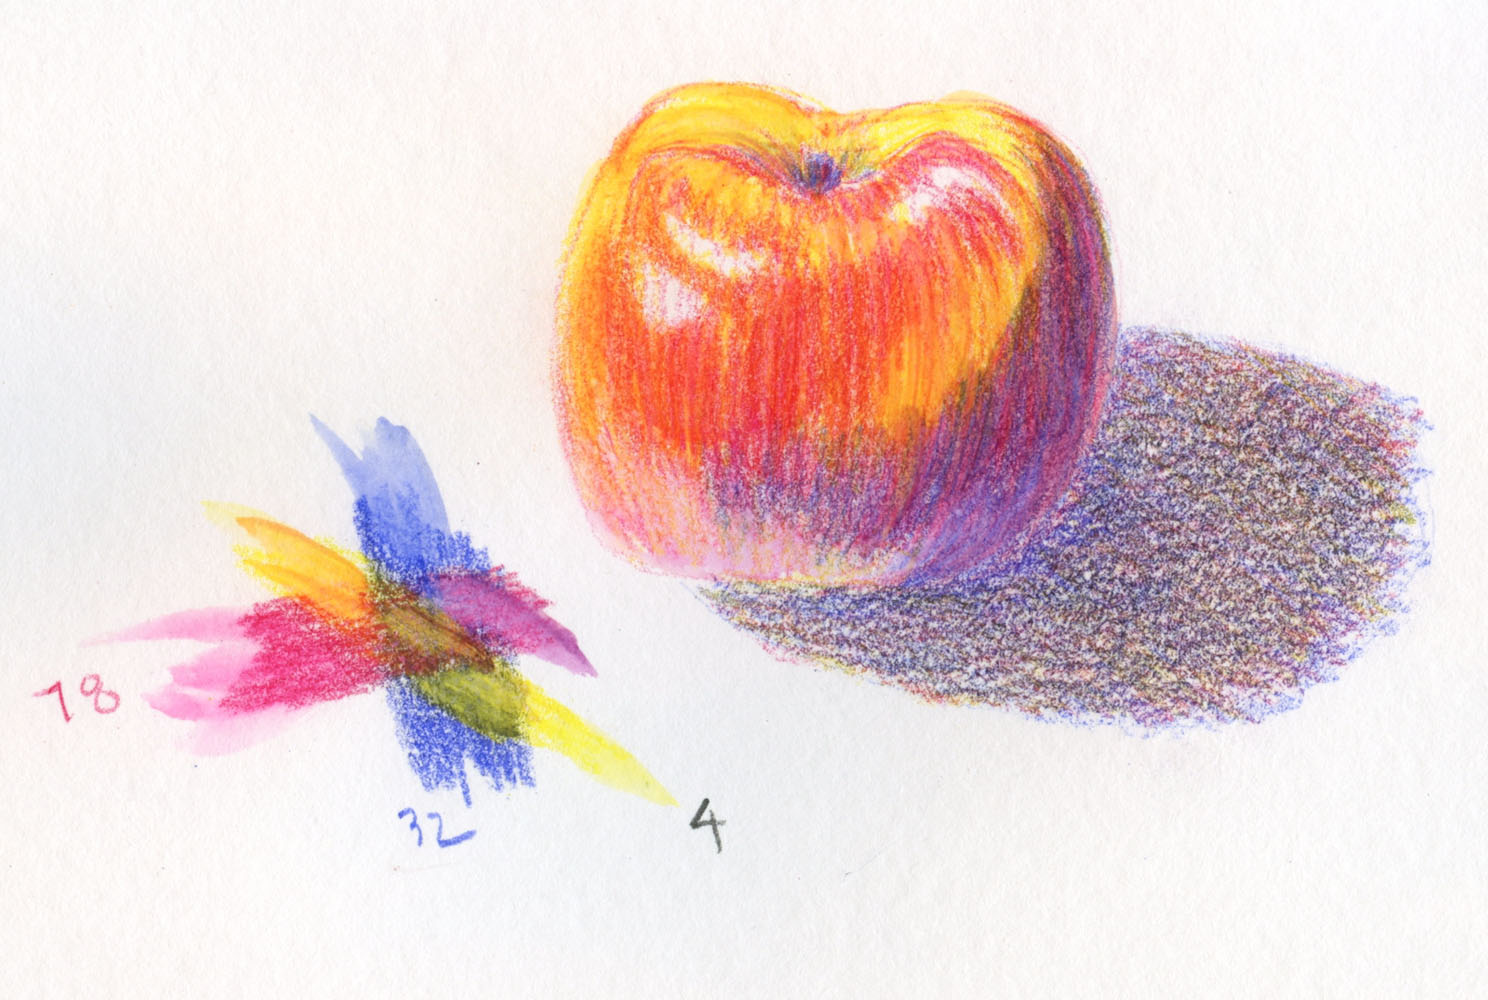 Arteza - You know what's cool about watercolor pencils